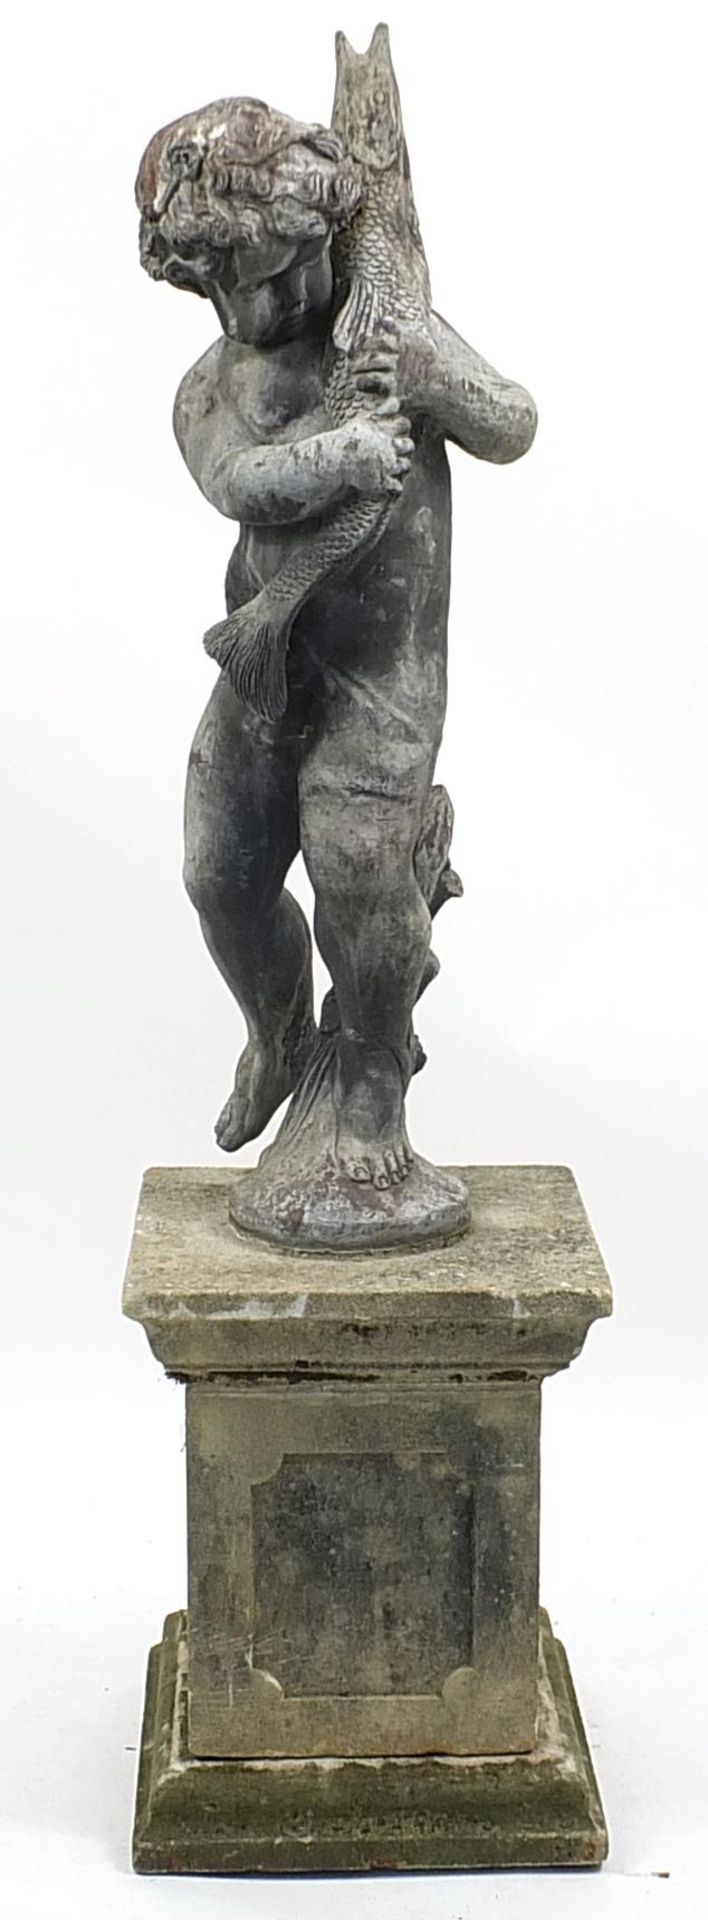 Lead garden water feature of Putti holding a fish, raised on a square concrete base, 145cm high